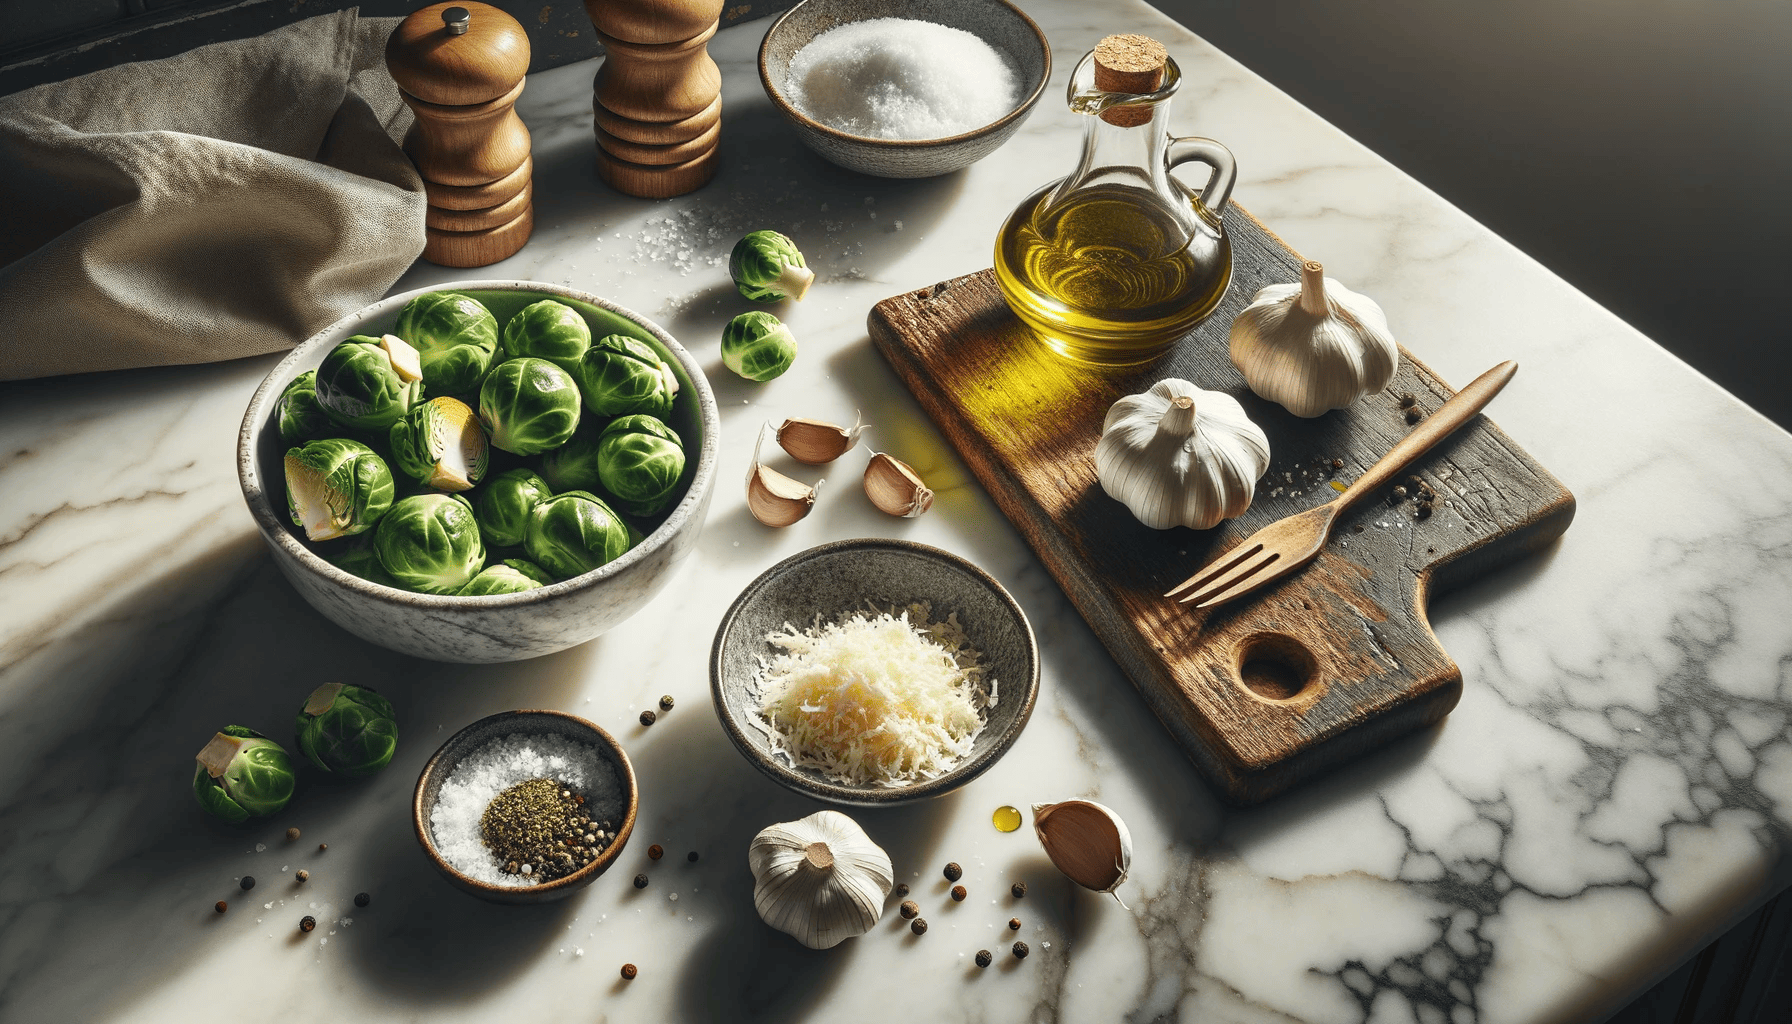 The ingredients for my crispy garlic parmesan Brussels Sprouts recipe